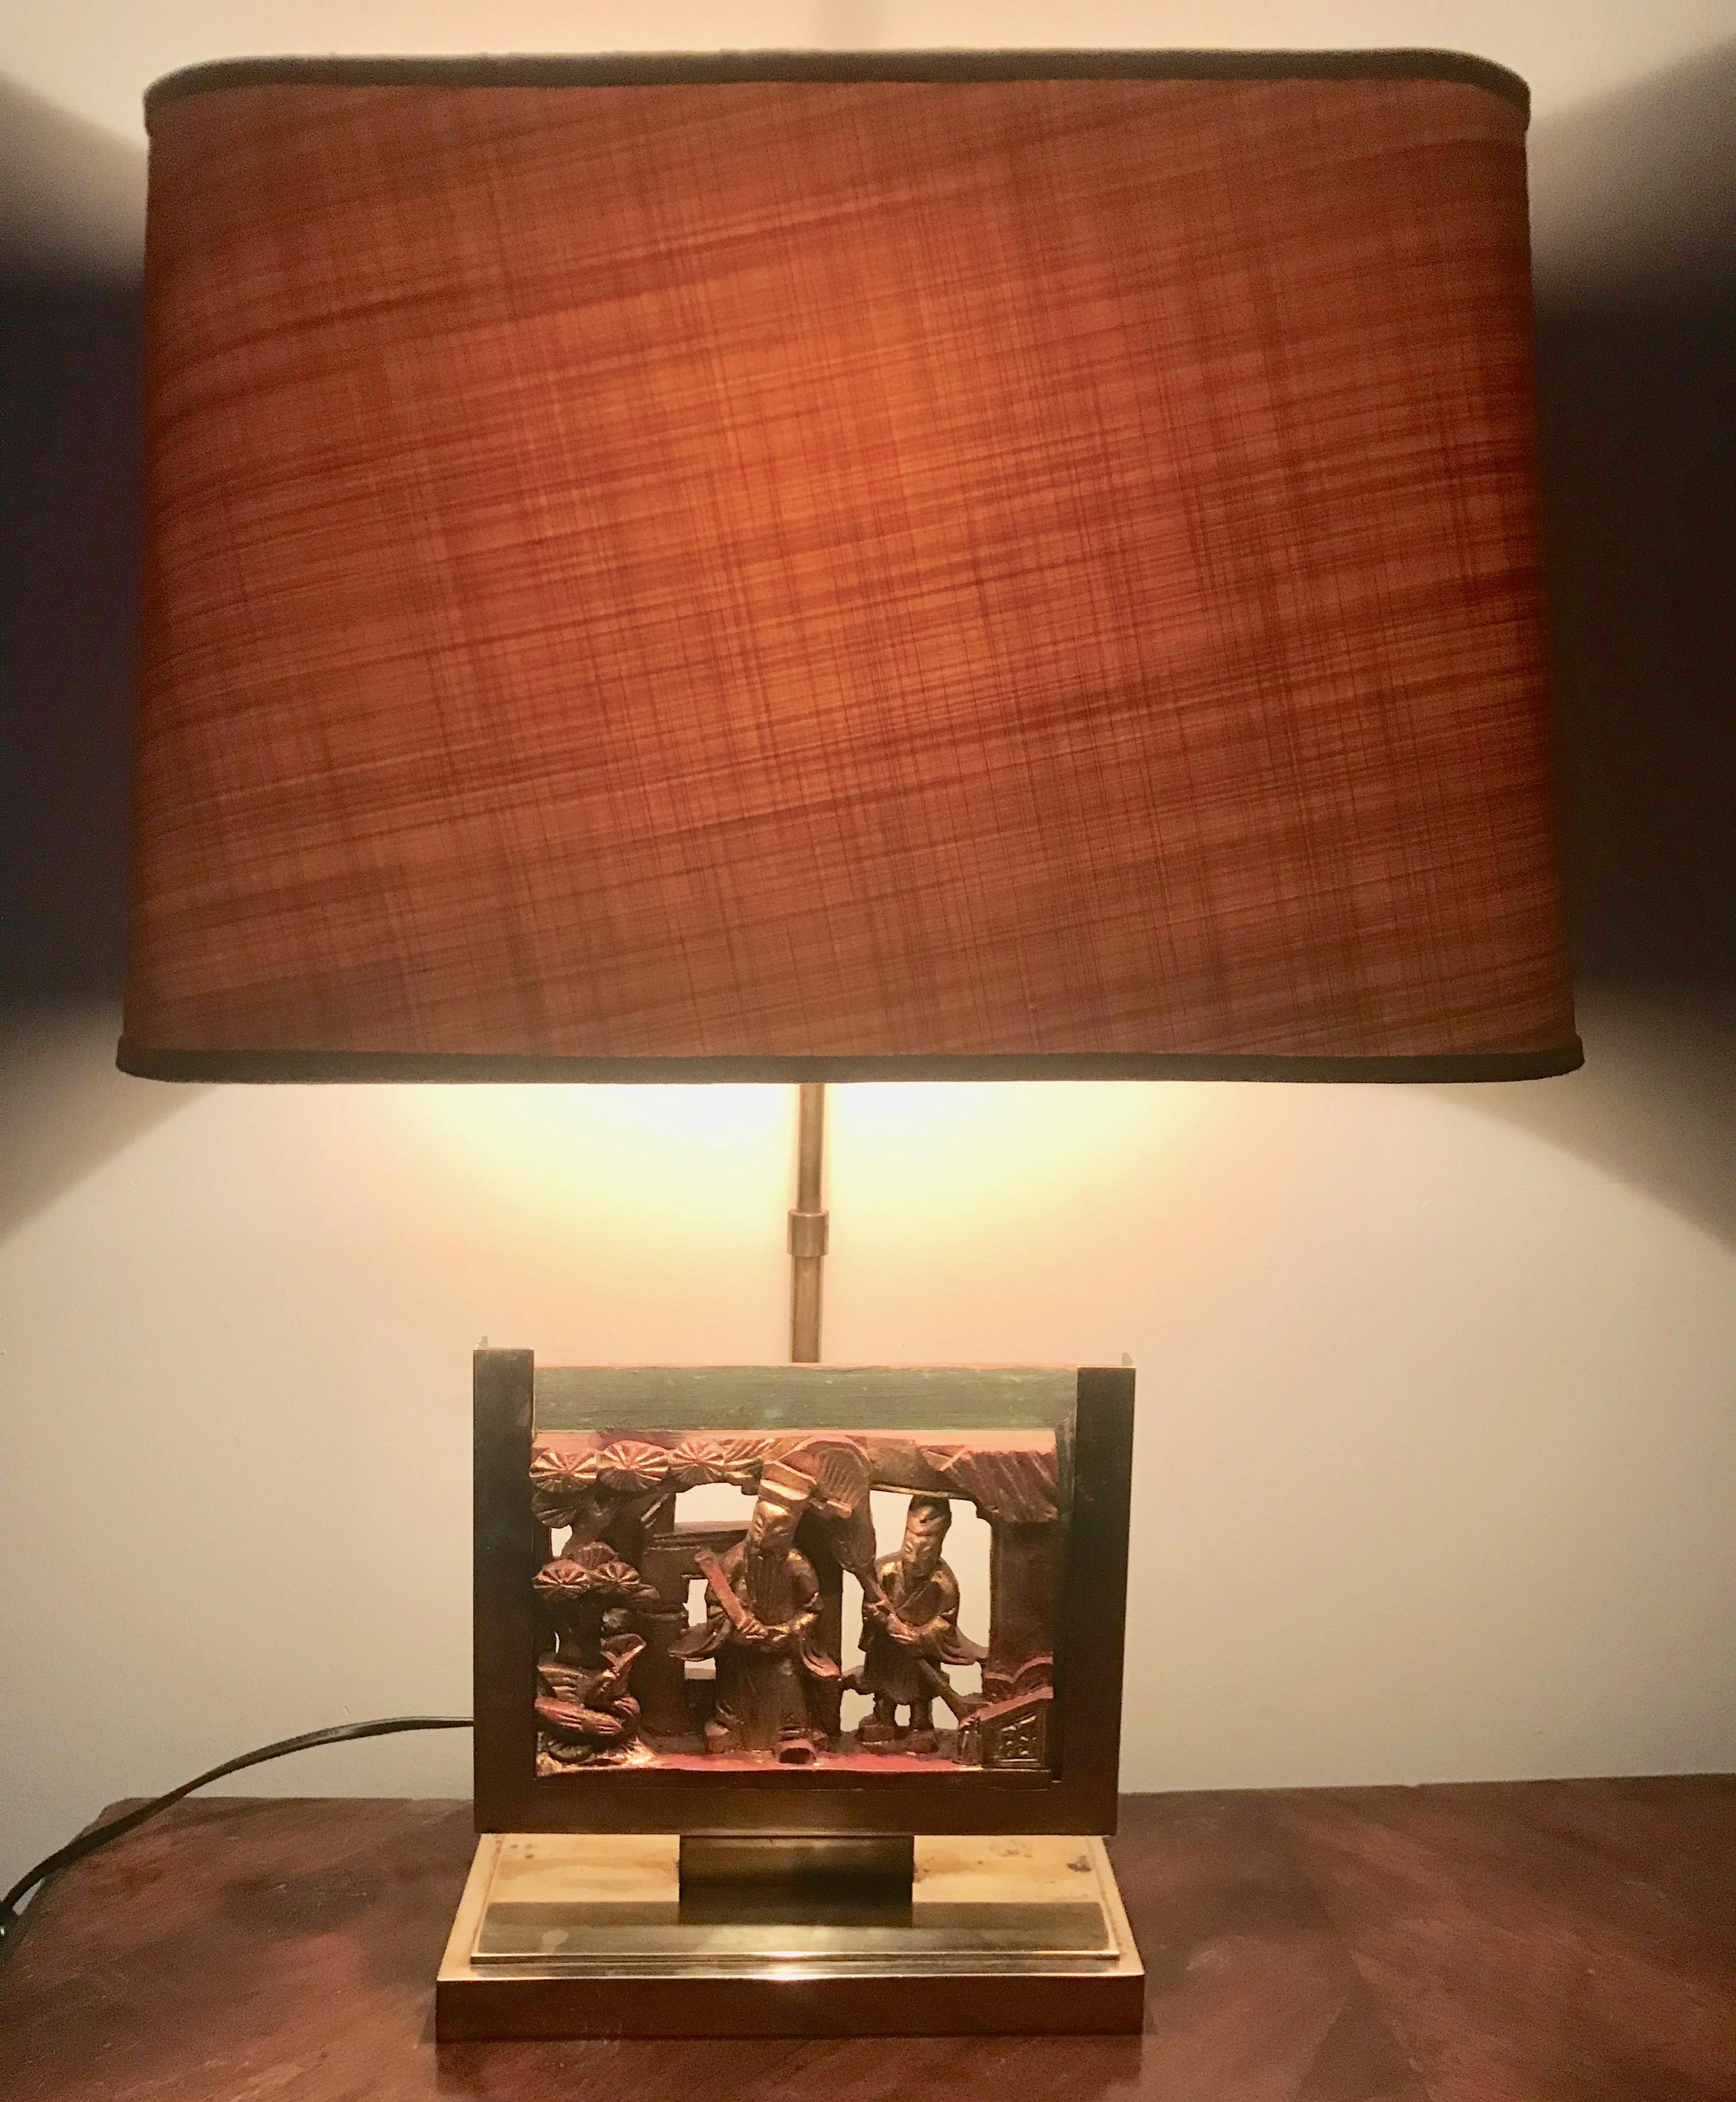 A pair of circa 1960 French Mid-Century Modern brass table lamps featuring two 19th century Chinese carved wood panels. The panels are unique and each retains traces of paint and gold leaf. The lamp shades are original (custom made for the lamps) in